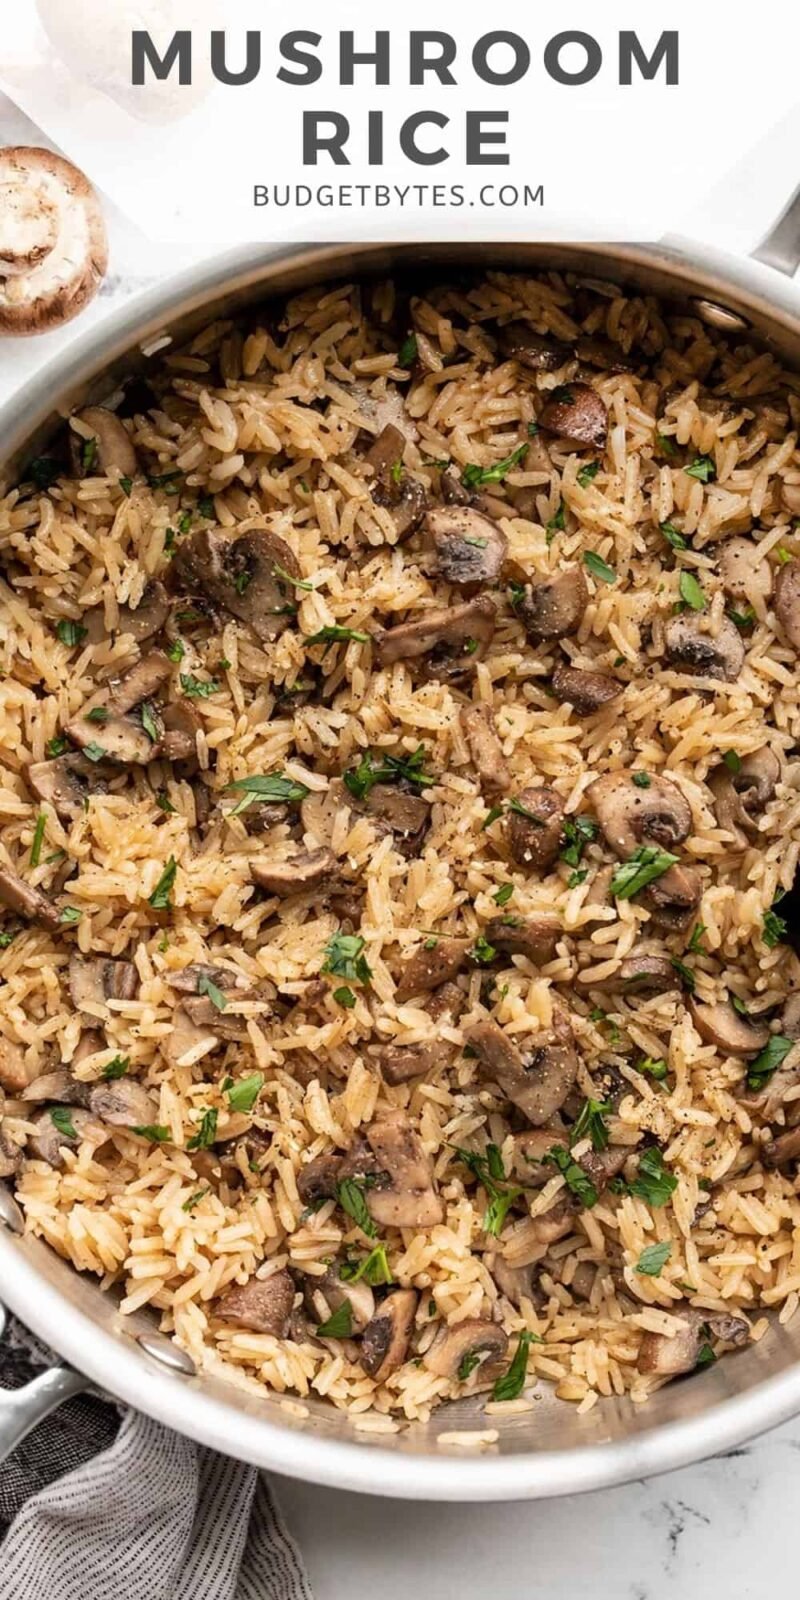 Mushroom rice in a skillet, title text at the top